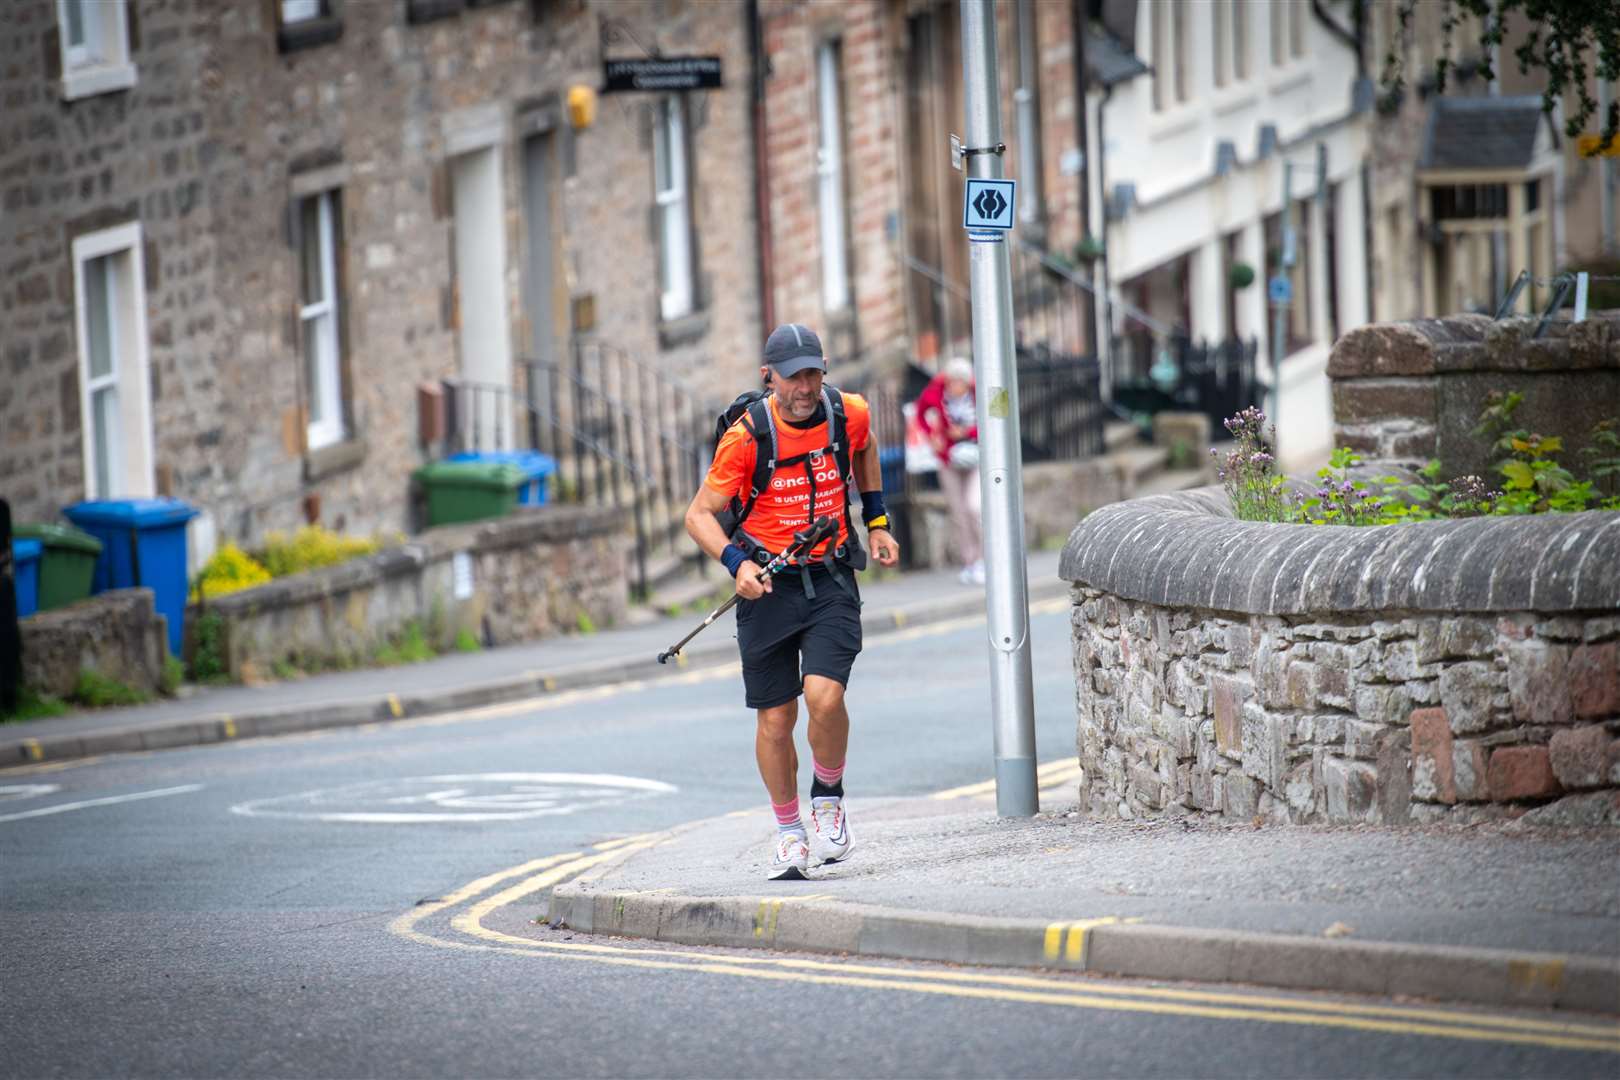 Climbing his last hill of the challenge ... Nicky Forster ran the NC500 unsupported to raise funds for Mental Health UK. Picture: Callum Mackay.